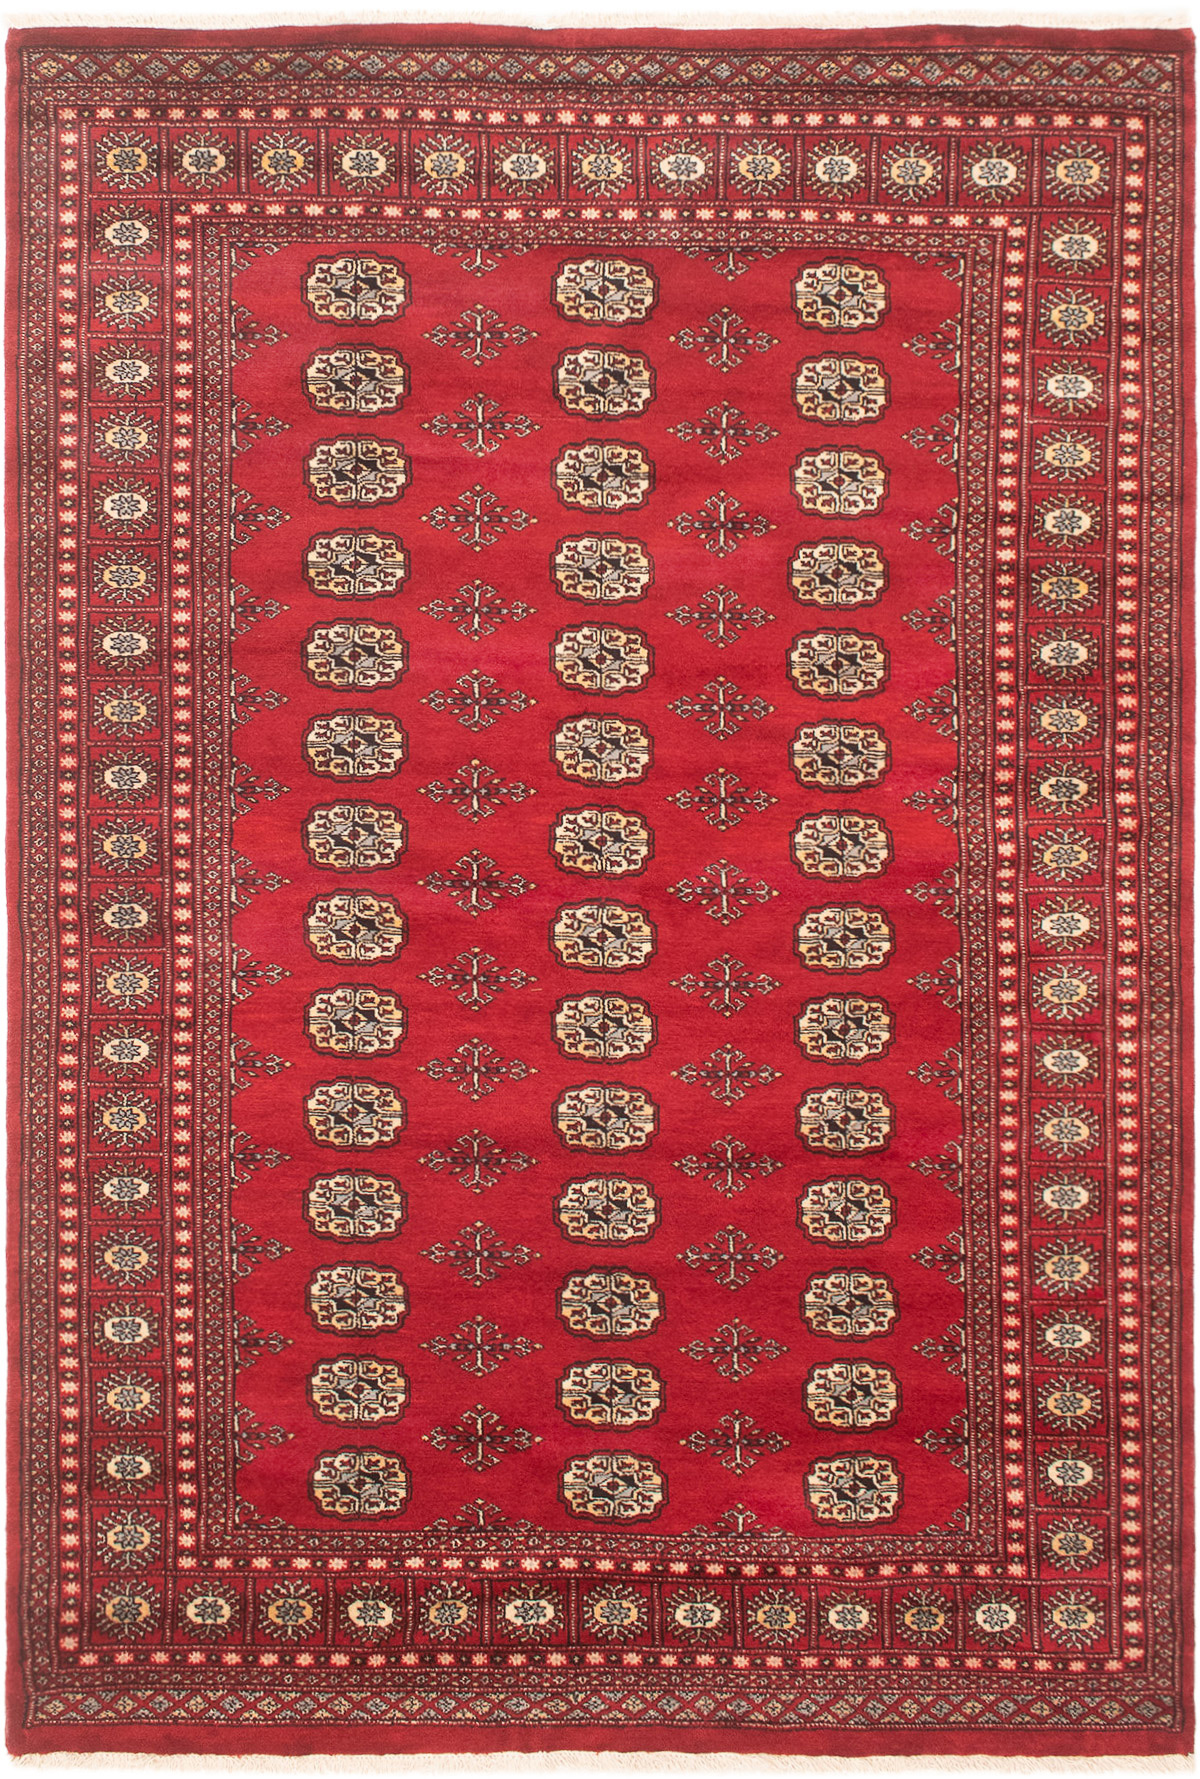 Hand-knotted Finest Peshawar Bokhara Red Wool Rug 5'6" x 8'2" Size: 5'6" x 8'2"  